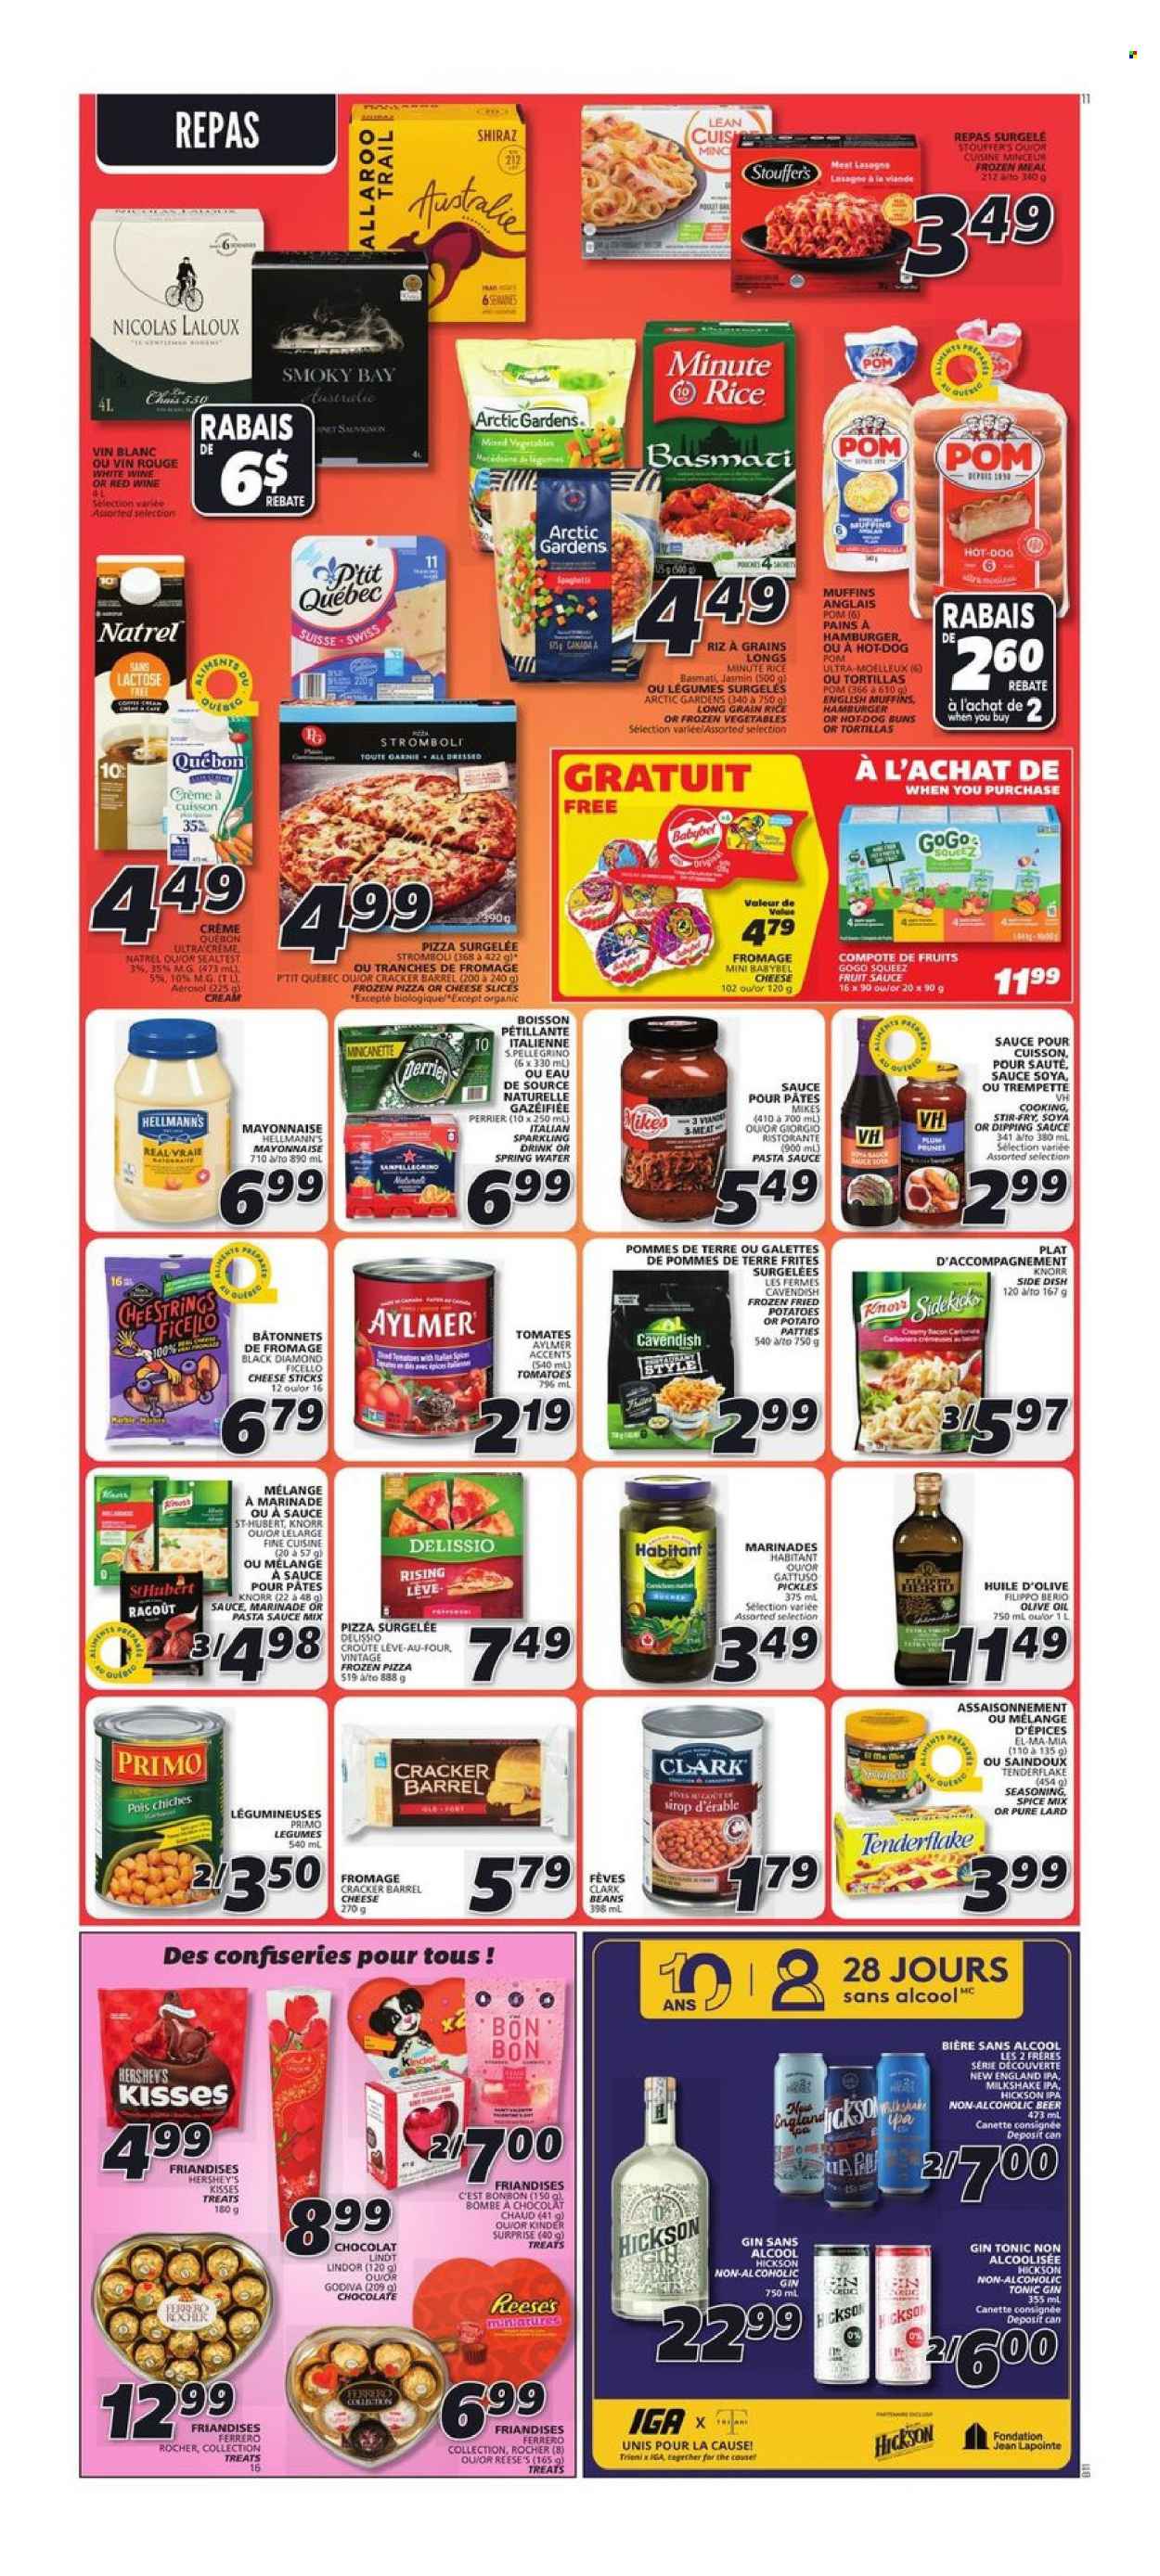 thumbnail - IGA Flyer - February 02, 2023 - February 08, 2023 - Sales products - english muffins, tortillas, pizza, pasta sauce, hamburger, lasagna meal, sliced cheese, string cheese, Babybel, milkshake, shake, mayonnaise, Hellmann’s, Reese's, Hershey's, frozen vegetables, cheese sticks, Stouffer's, chocolate, Kinder Surprise, Godiva, crackers, pickles, compote, basmati rice, long grain rice, spice, marinade, olive oil, prunes, dried fruit, tonic, Perrier, spring water, San Pellegrino, coffee, white wine, Shiraz, gin, beer, IPA, lard, Knorr, Lindt, Lindor, Ferrero Rocher. Page 10.